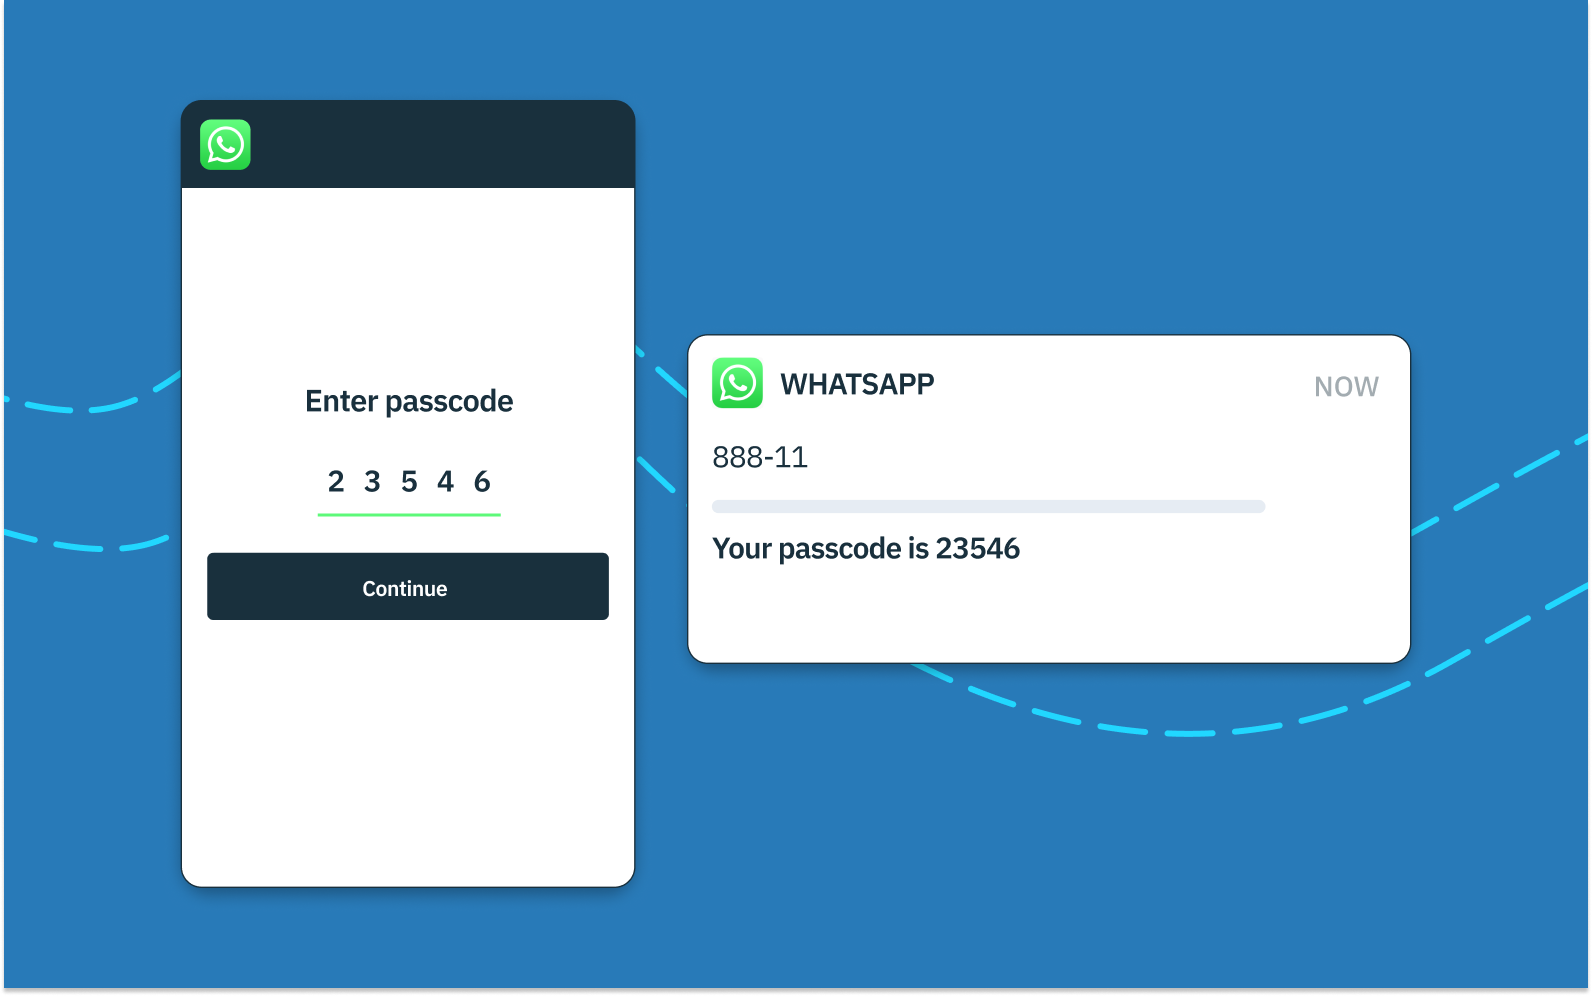 A browser window with a one-time passcode sent through SMS